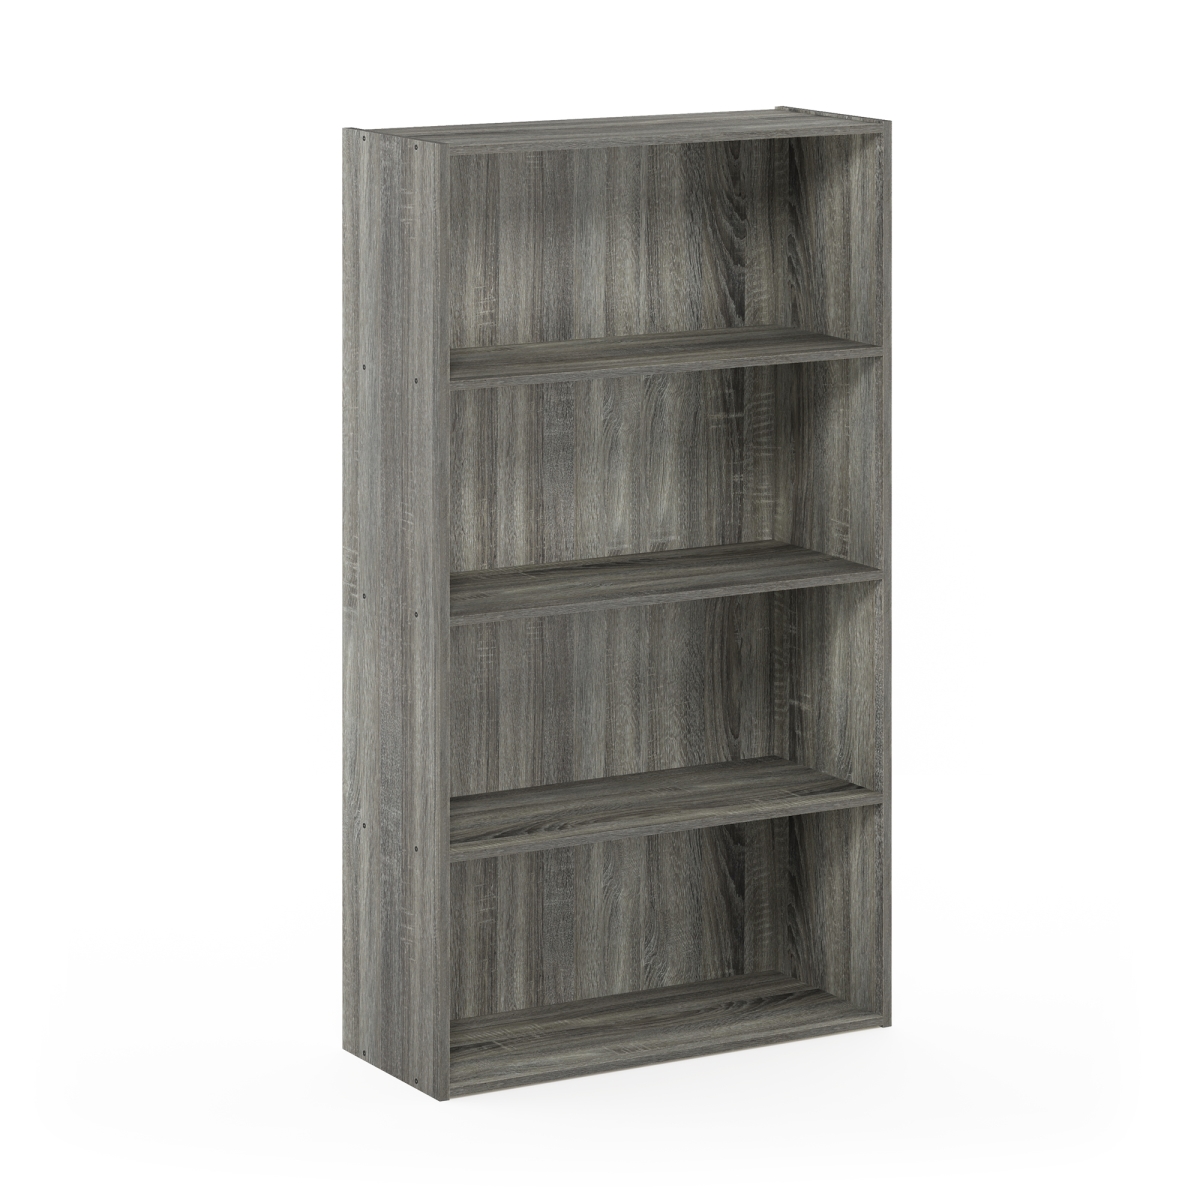 Picture of Furinno 11209GYW Pasir 4 Tier Open Shelf, French Oak Grey